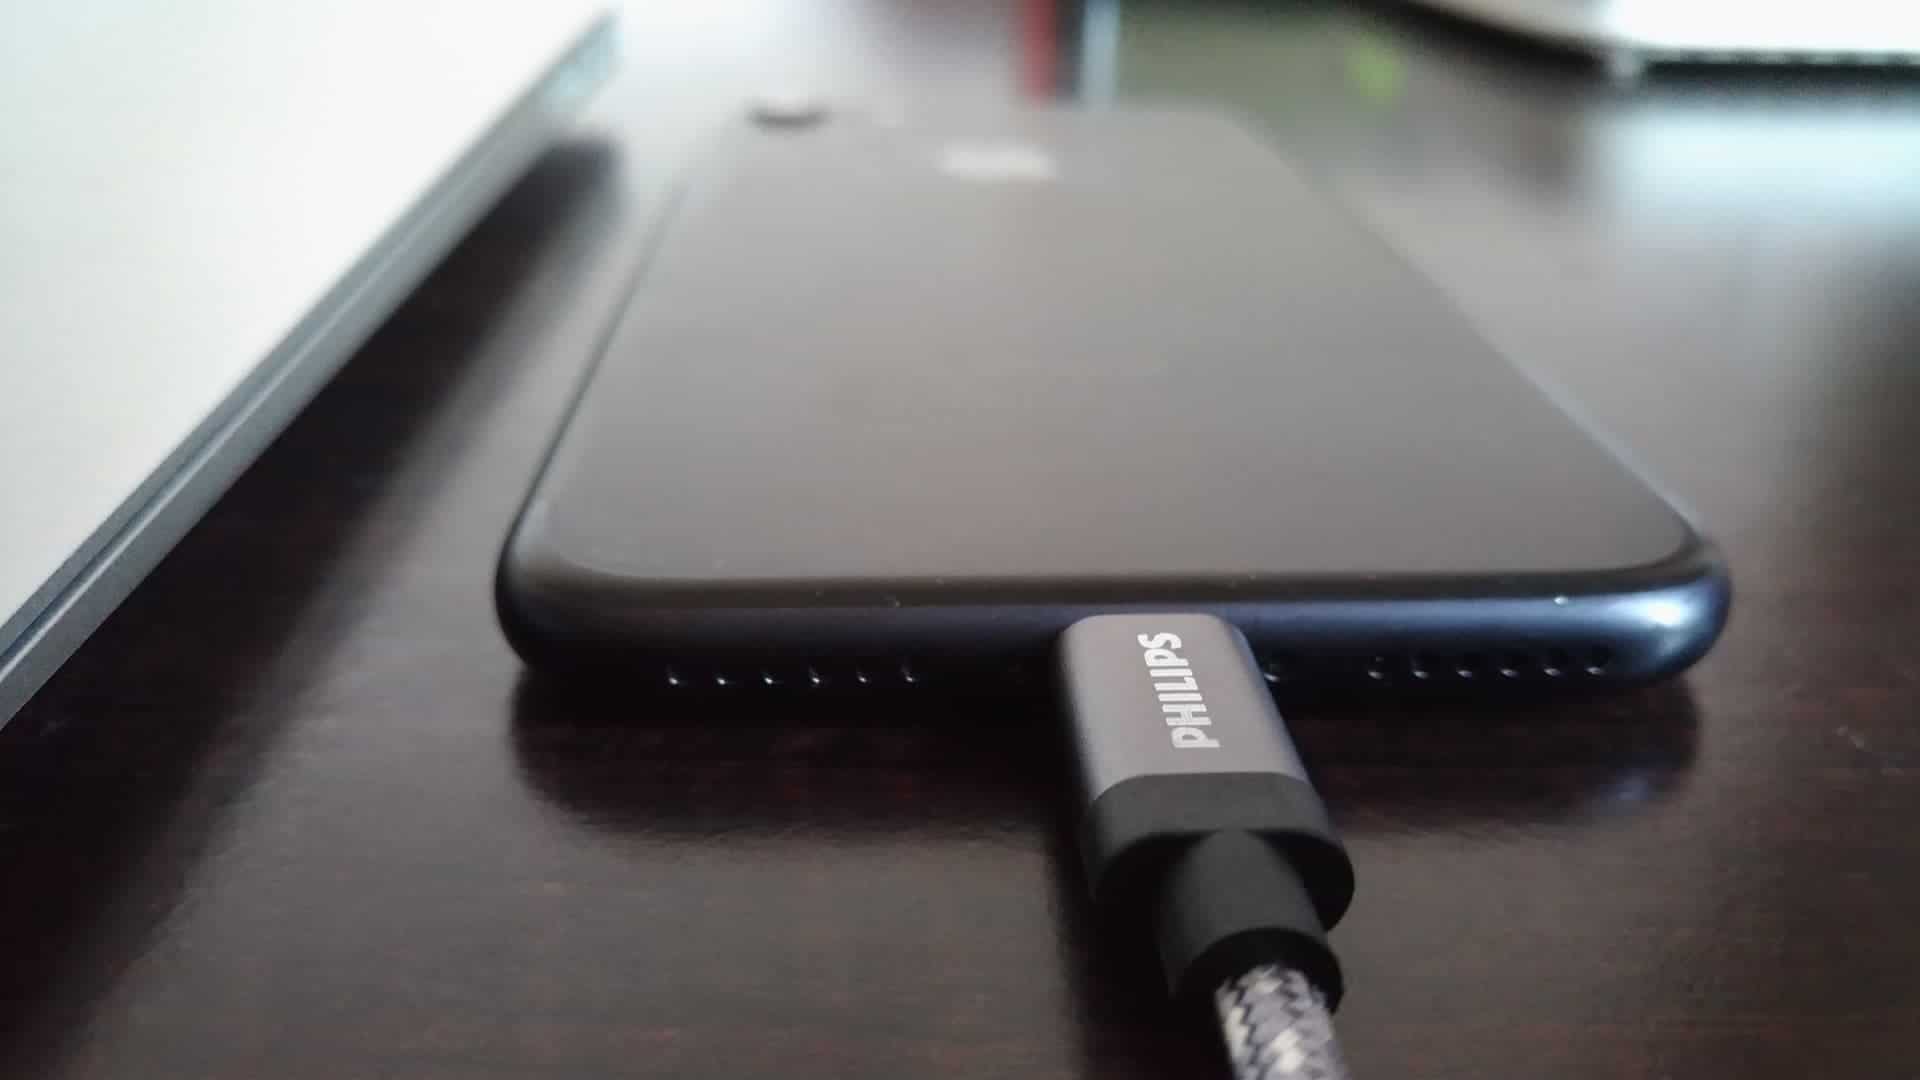 Philips Mobile Accessories - Testing Out the 13000mAh Portable Powerbank and an Apple Lightning Cable! - 17